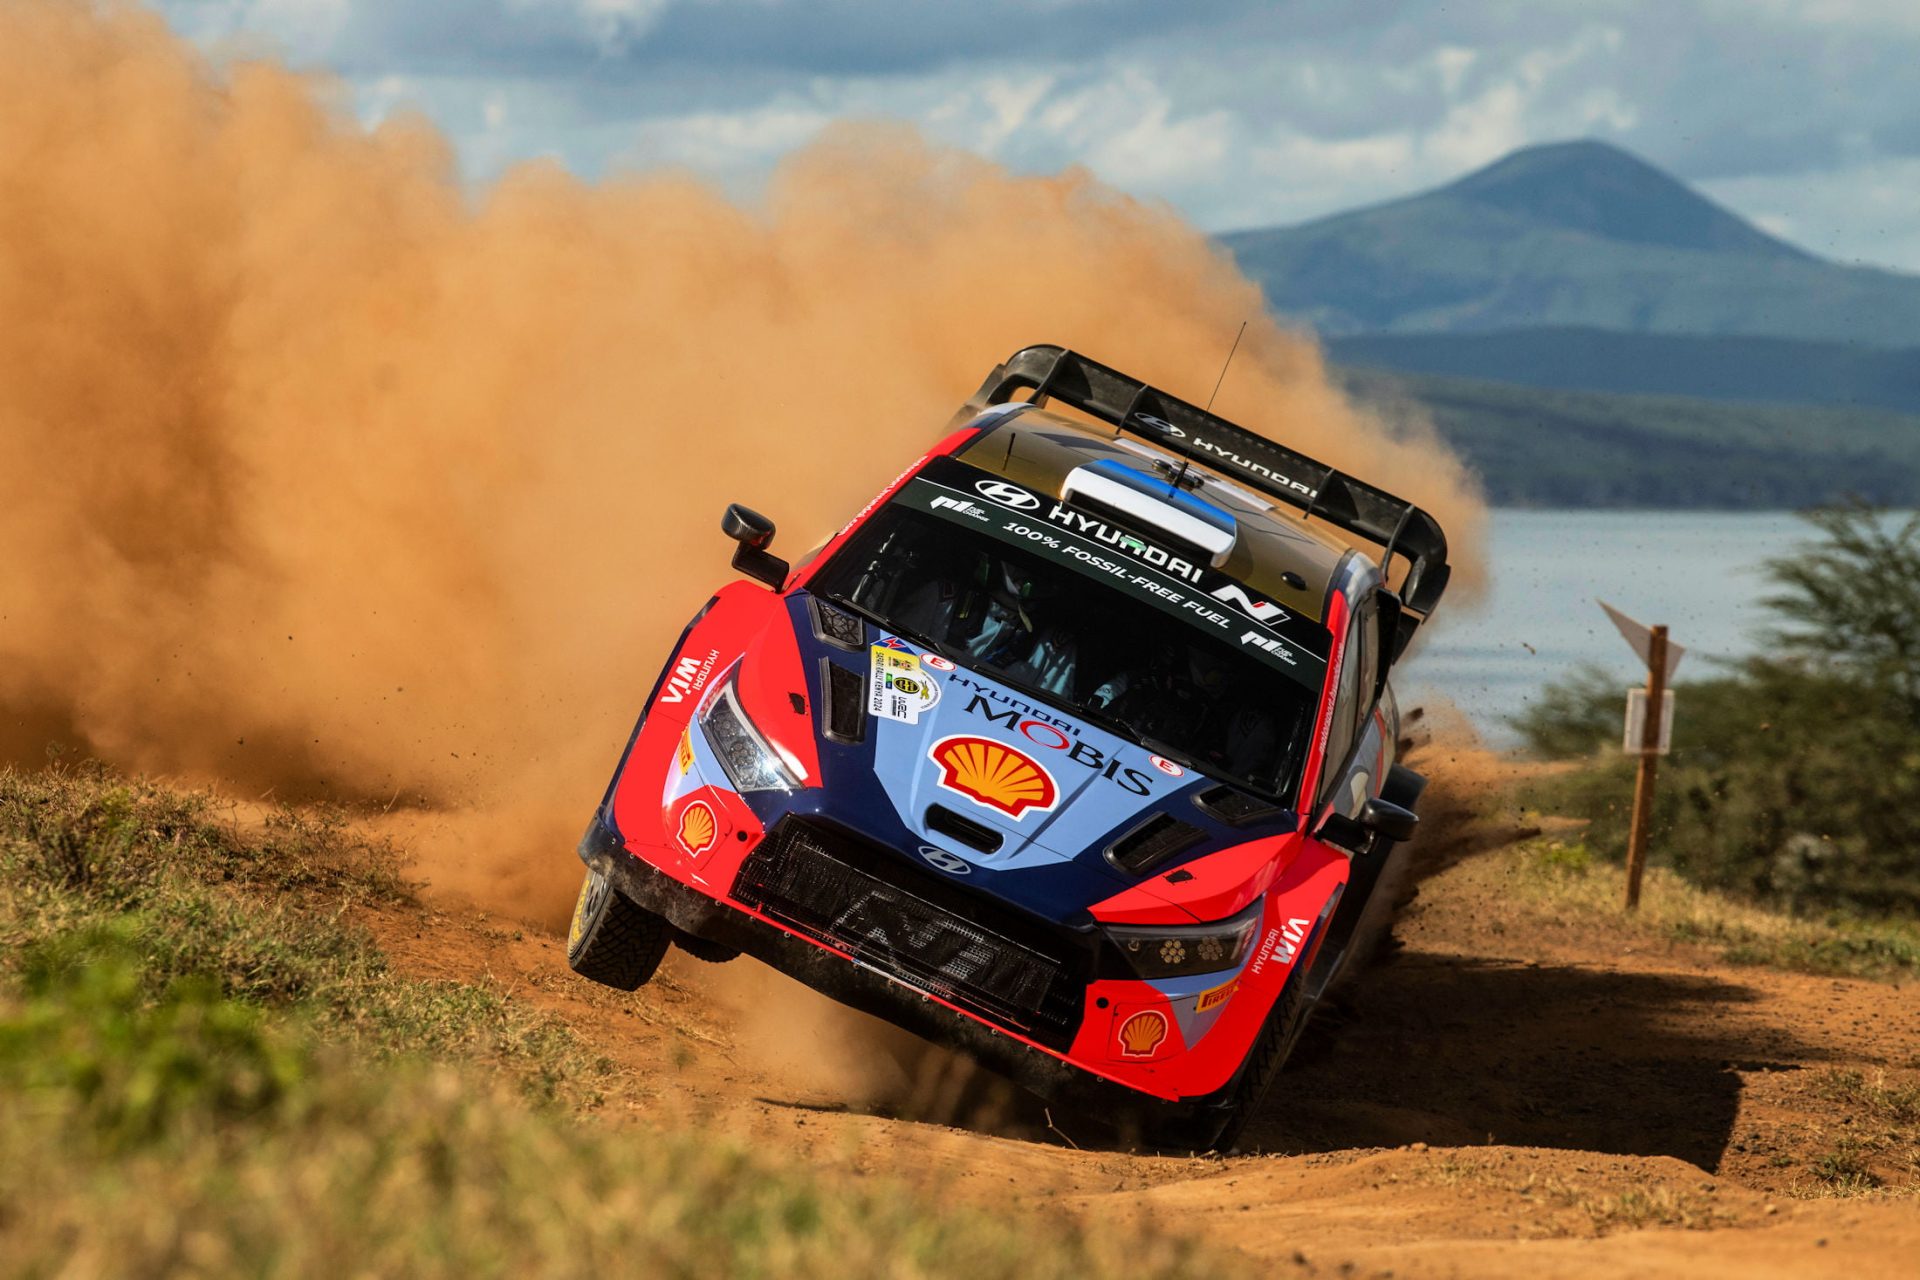 Safari Rally Kenya: Hyundai's Championship Hopes Crushed as Lappi and Tänak Bow Out in Disastrous Turn of Events